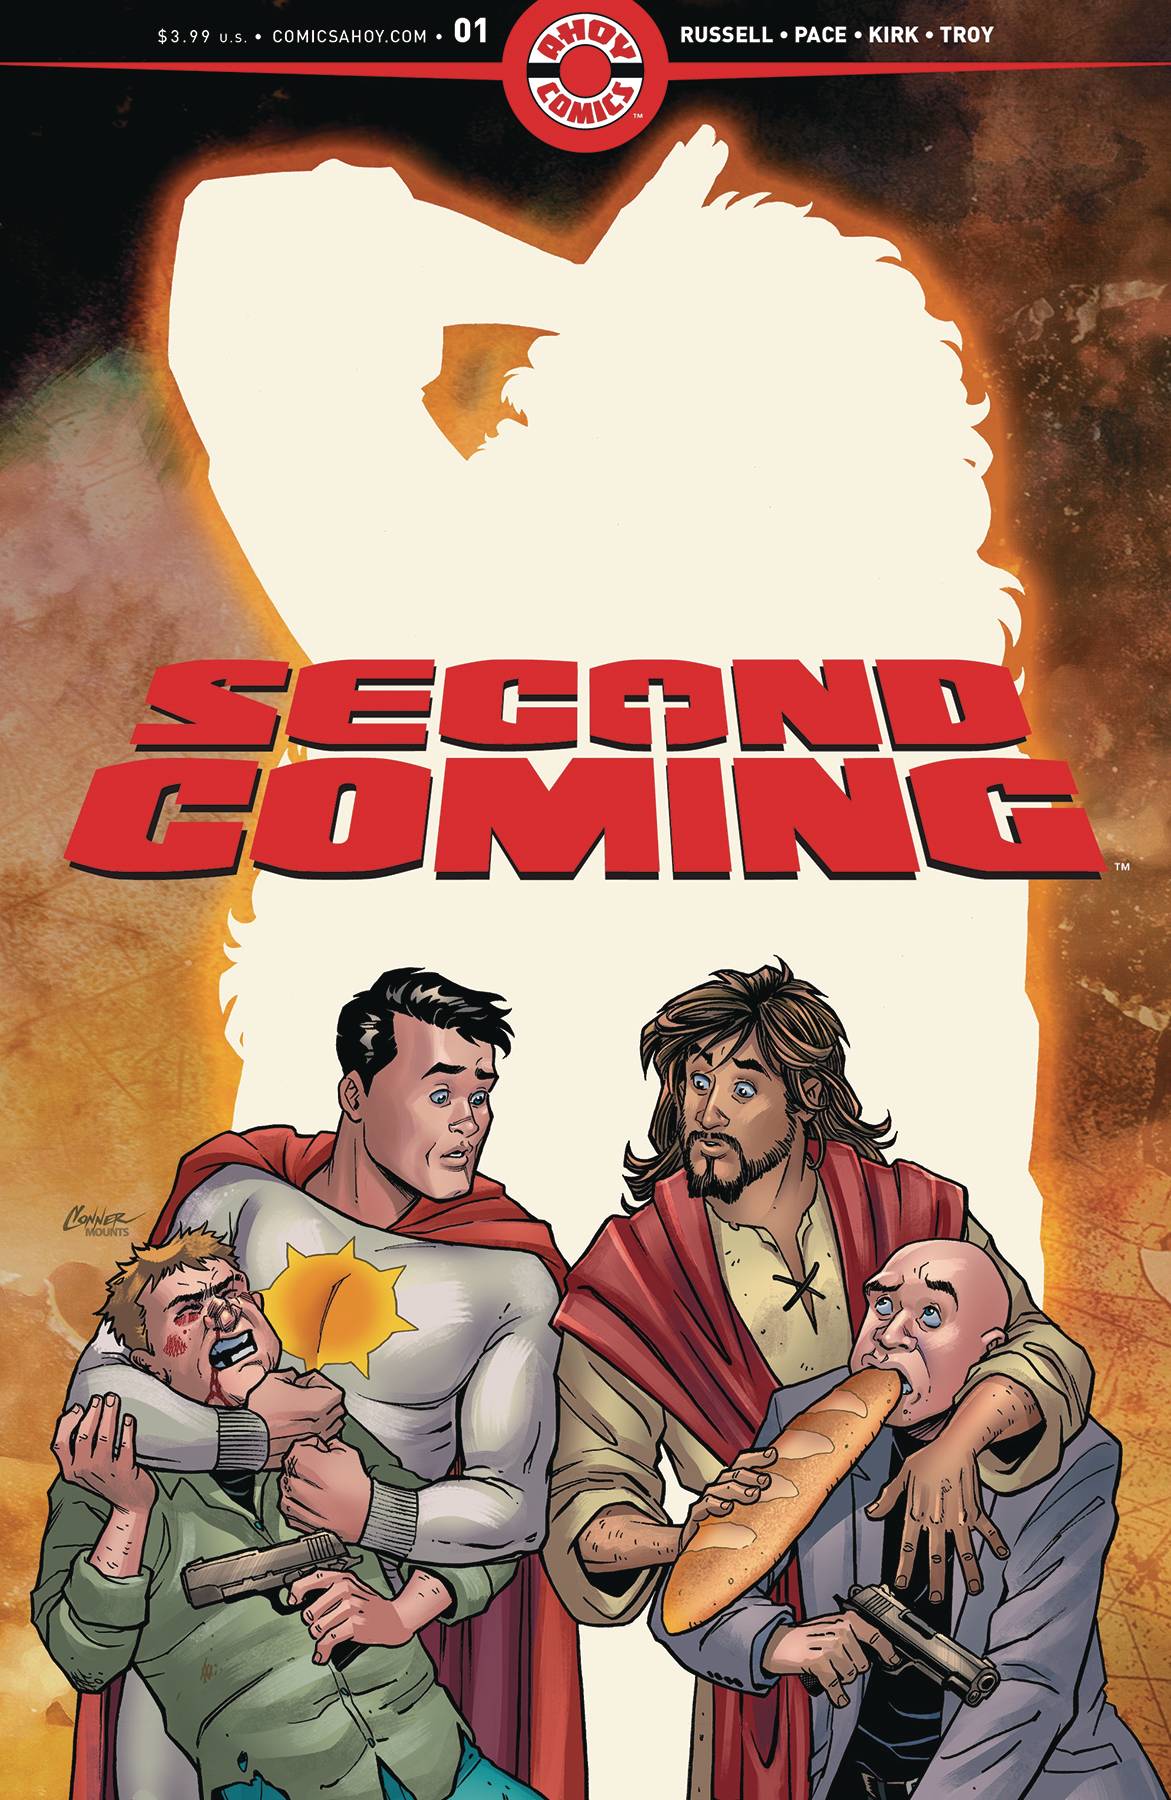 SECOND COMING #1 2ND PTG   08/14/19 FOC 07/22/19